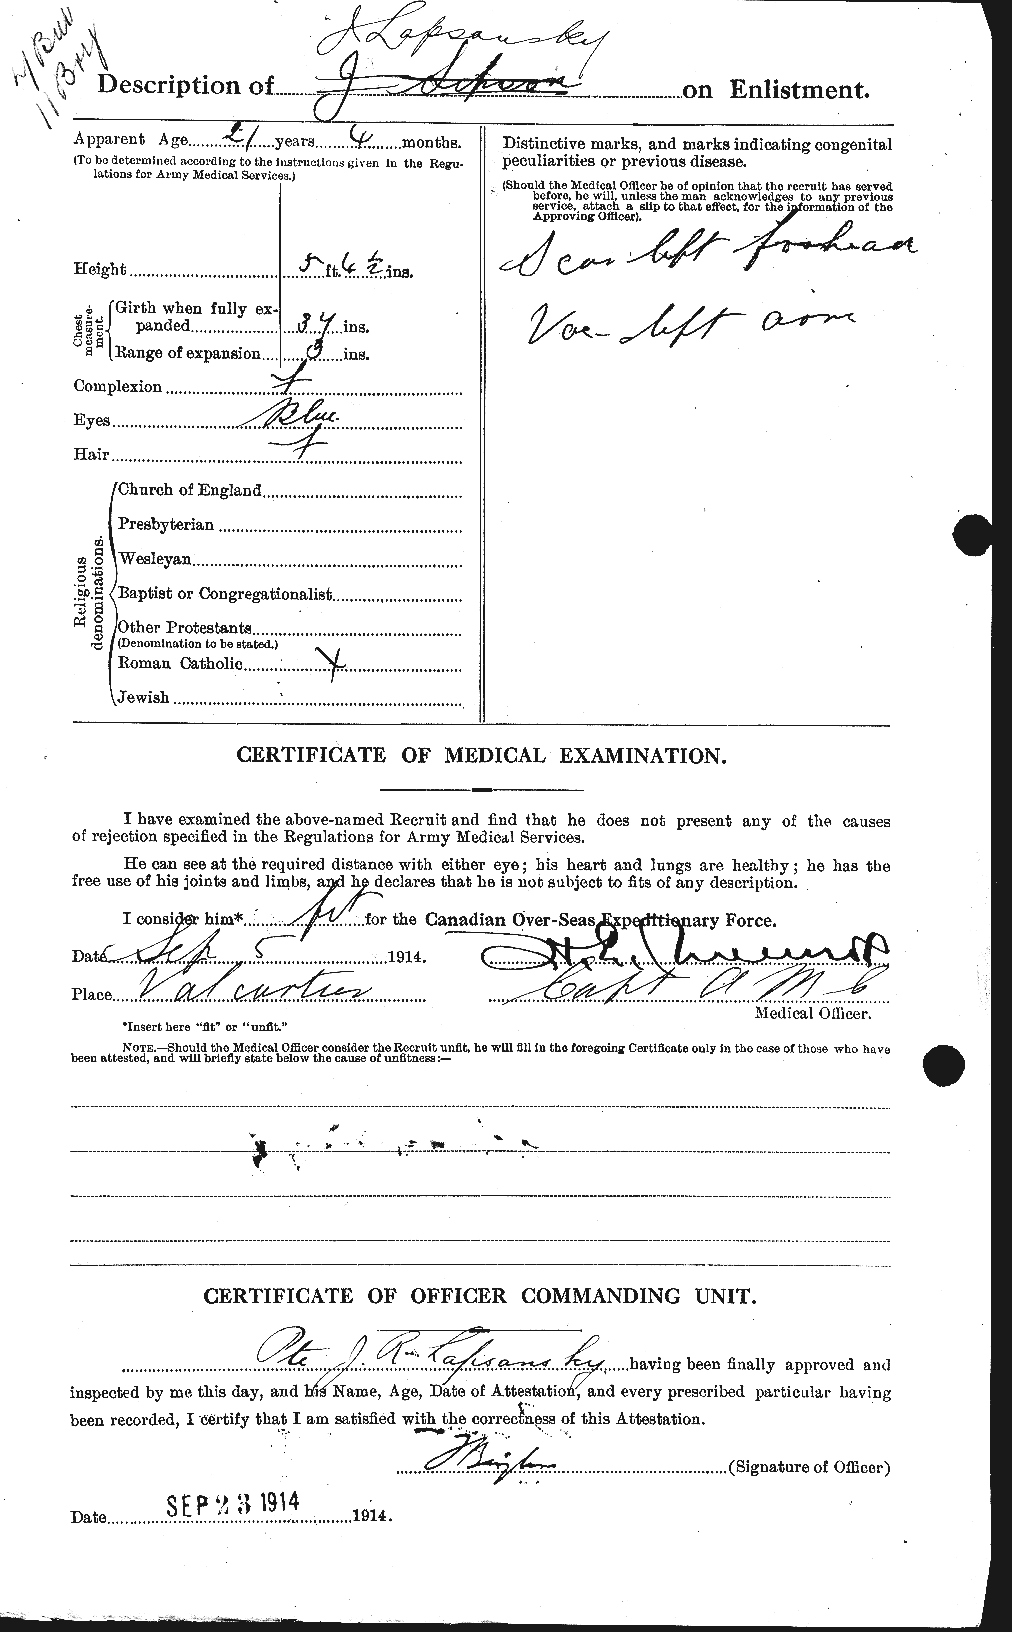 Personnel Records of the First World War - CEF 449137b